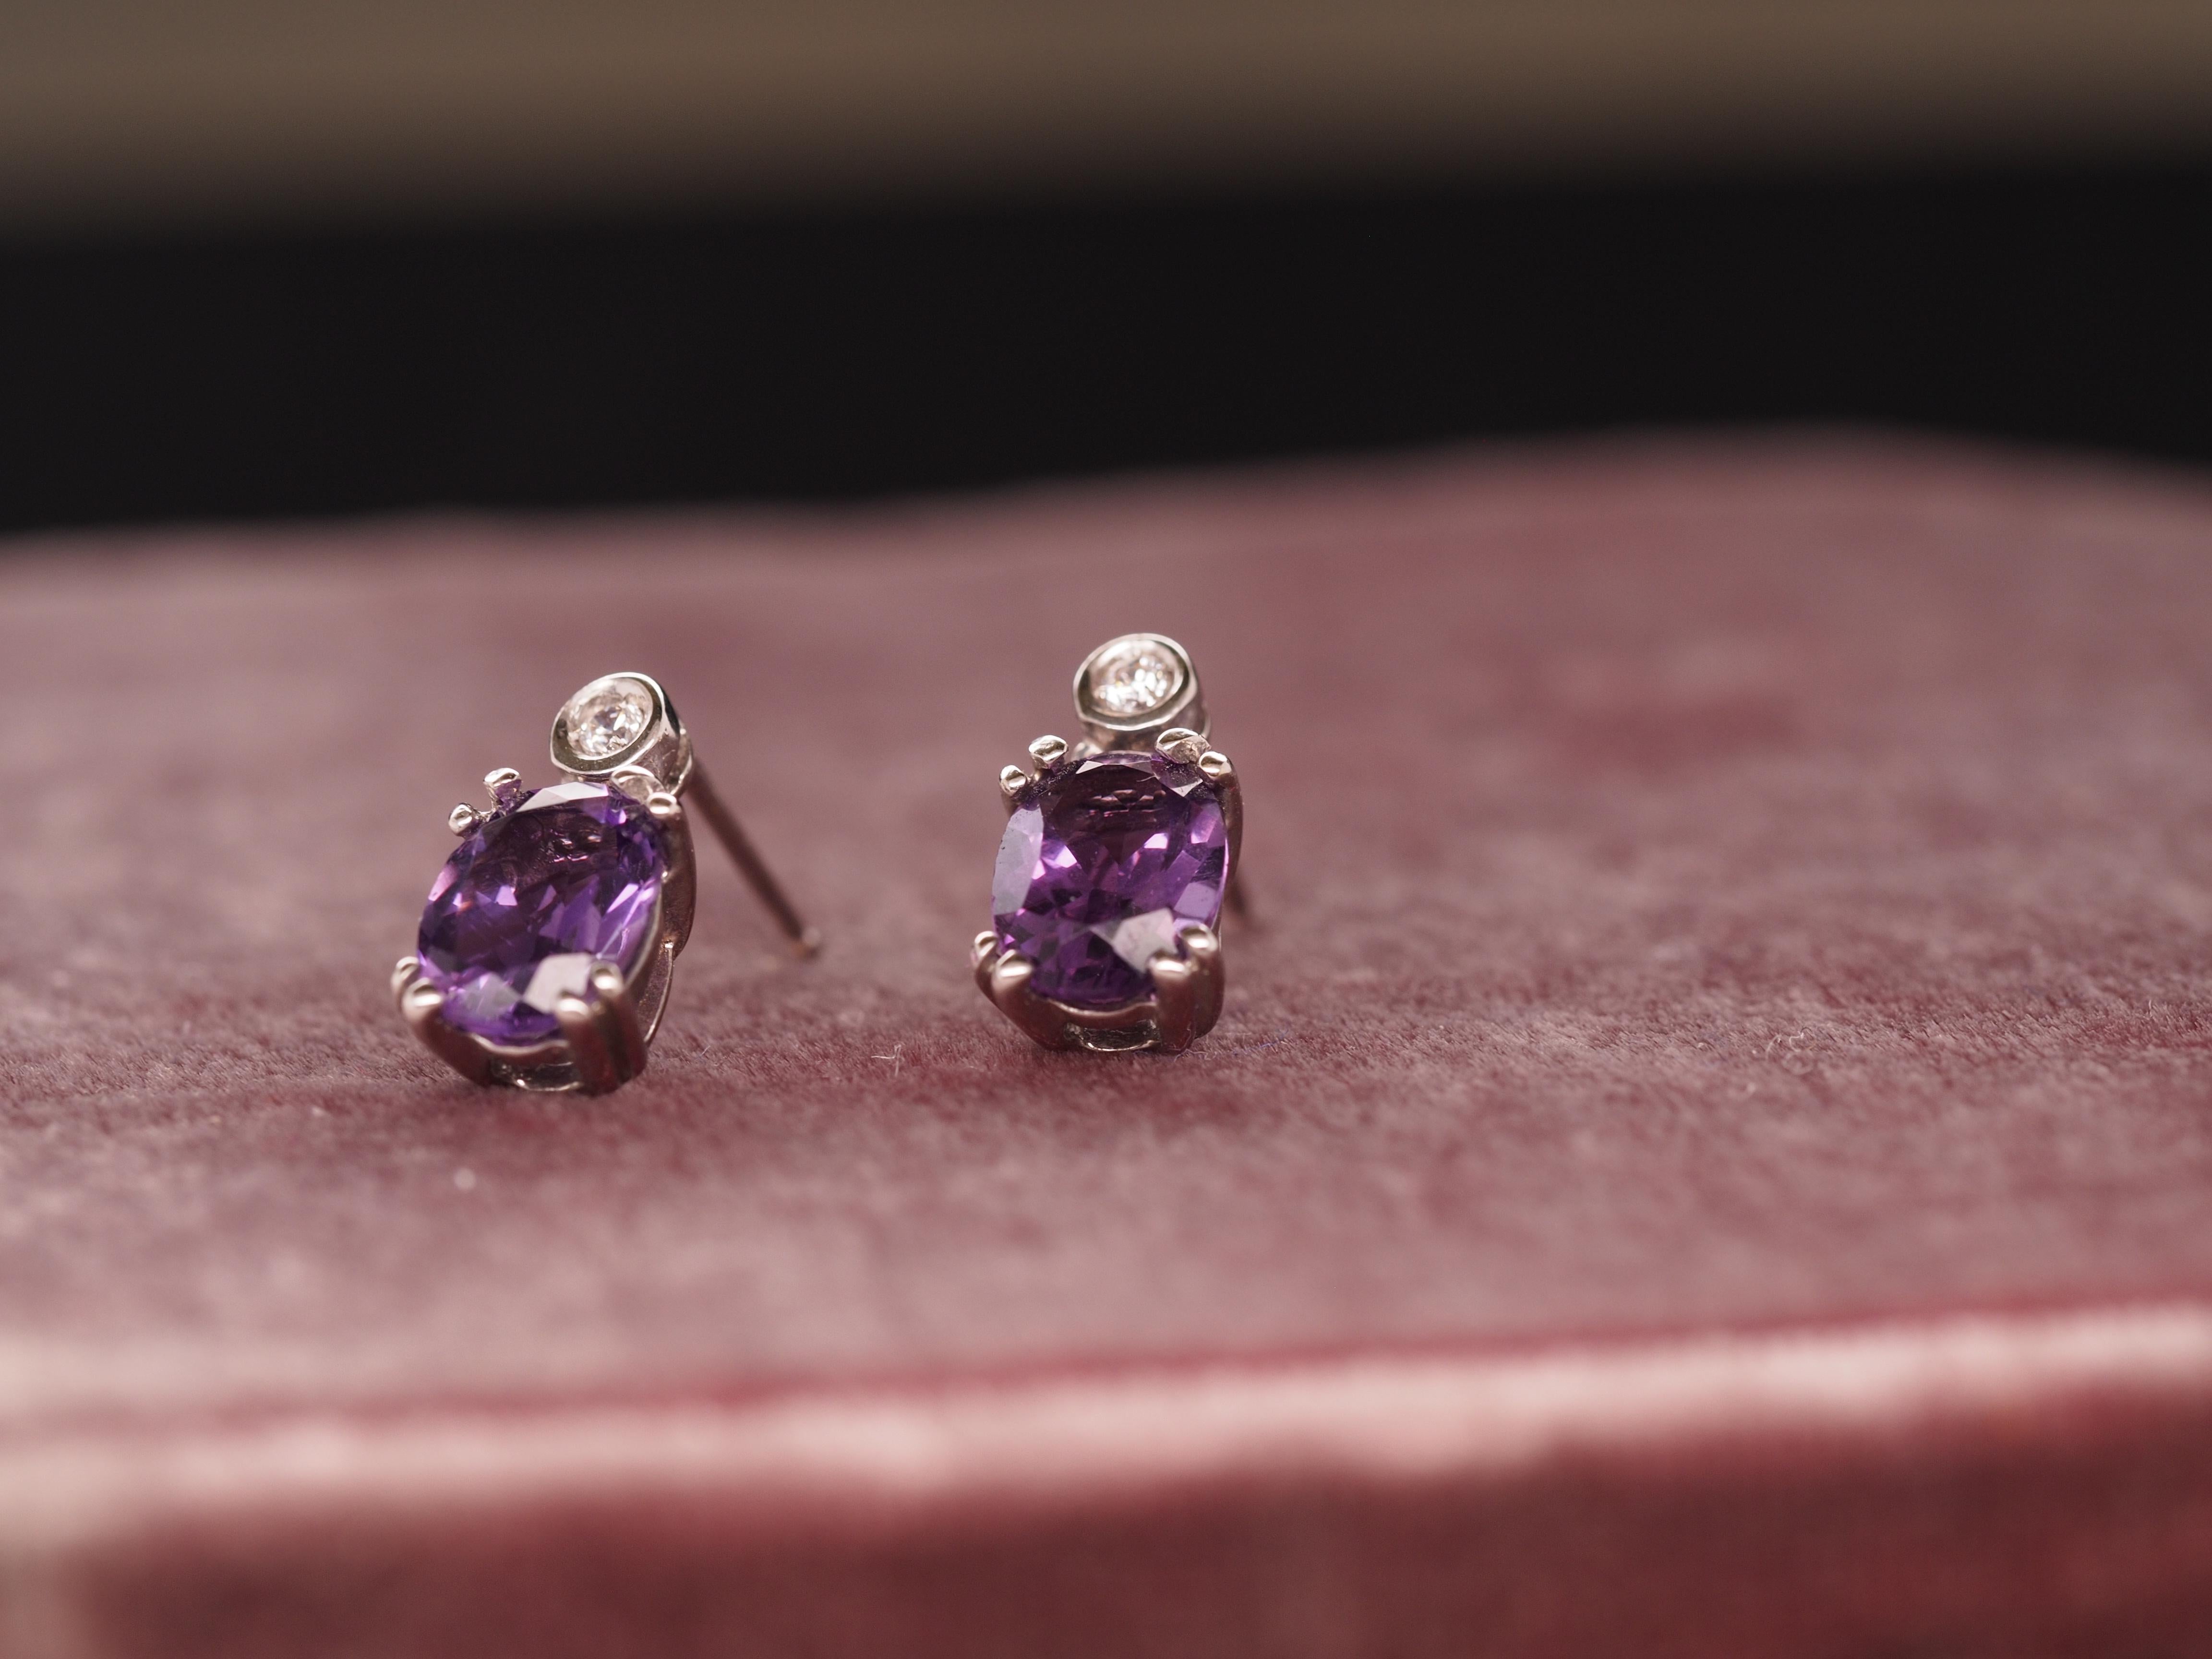 Item Details:
Metal Type: 14K White Gold   [Hallmarked, and Tested]
Weight:  2.4 grams

Diamond Details:

Type: Natural
Weight: .05ct, total weight
Cut: Round brilliant
Color: G-H
Clarity: VS

Amethyst Details:
Weight: 1 Carat each
Cut: Oval
Color: